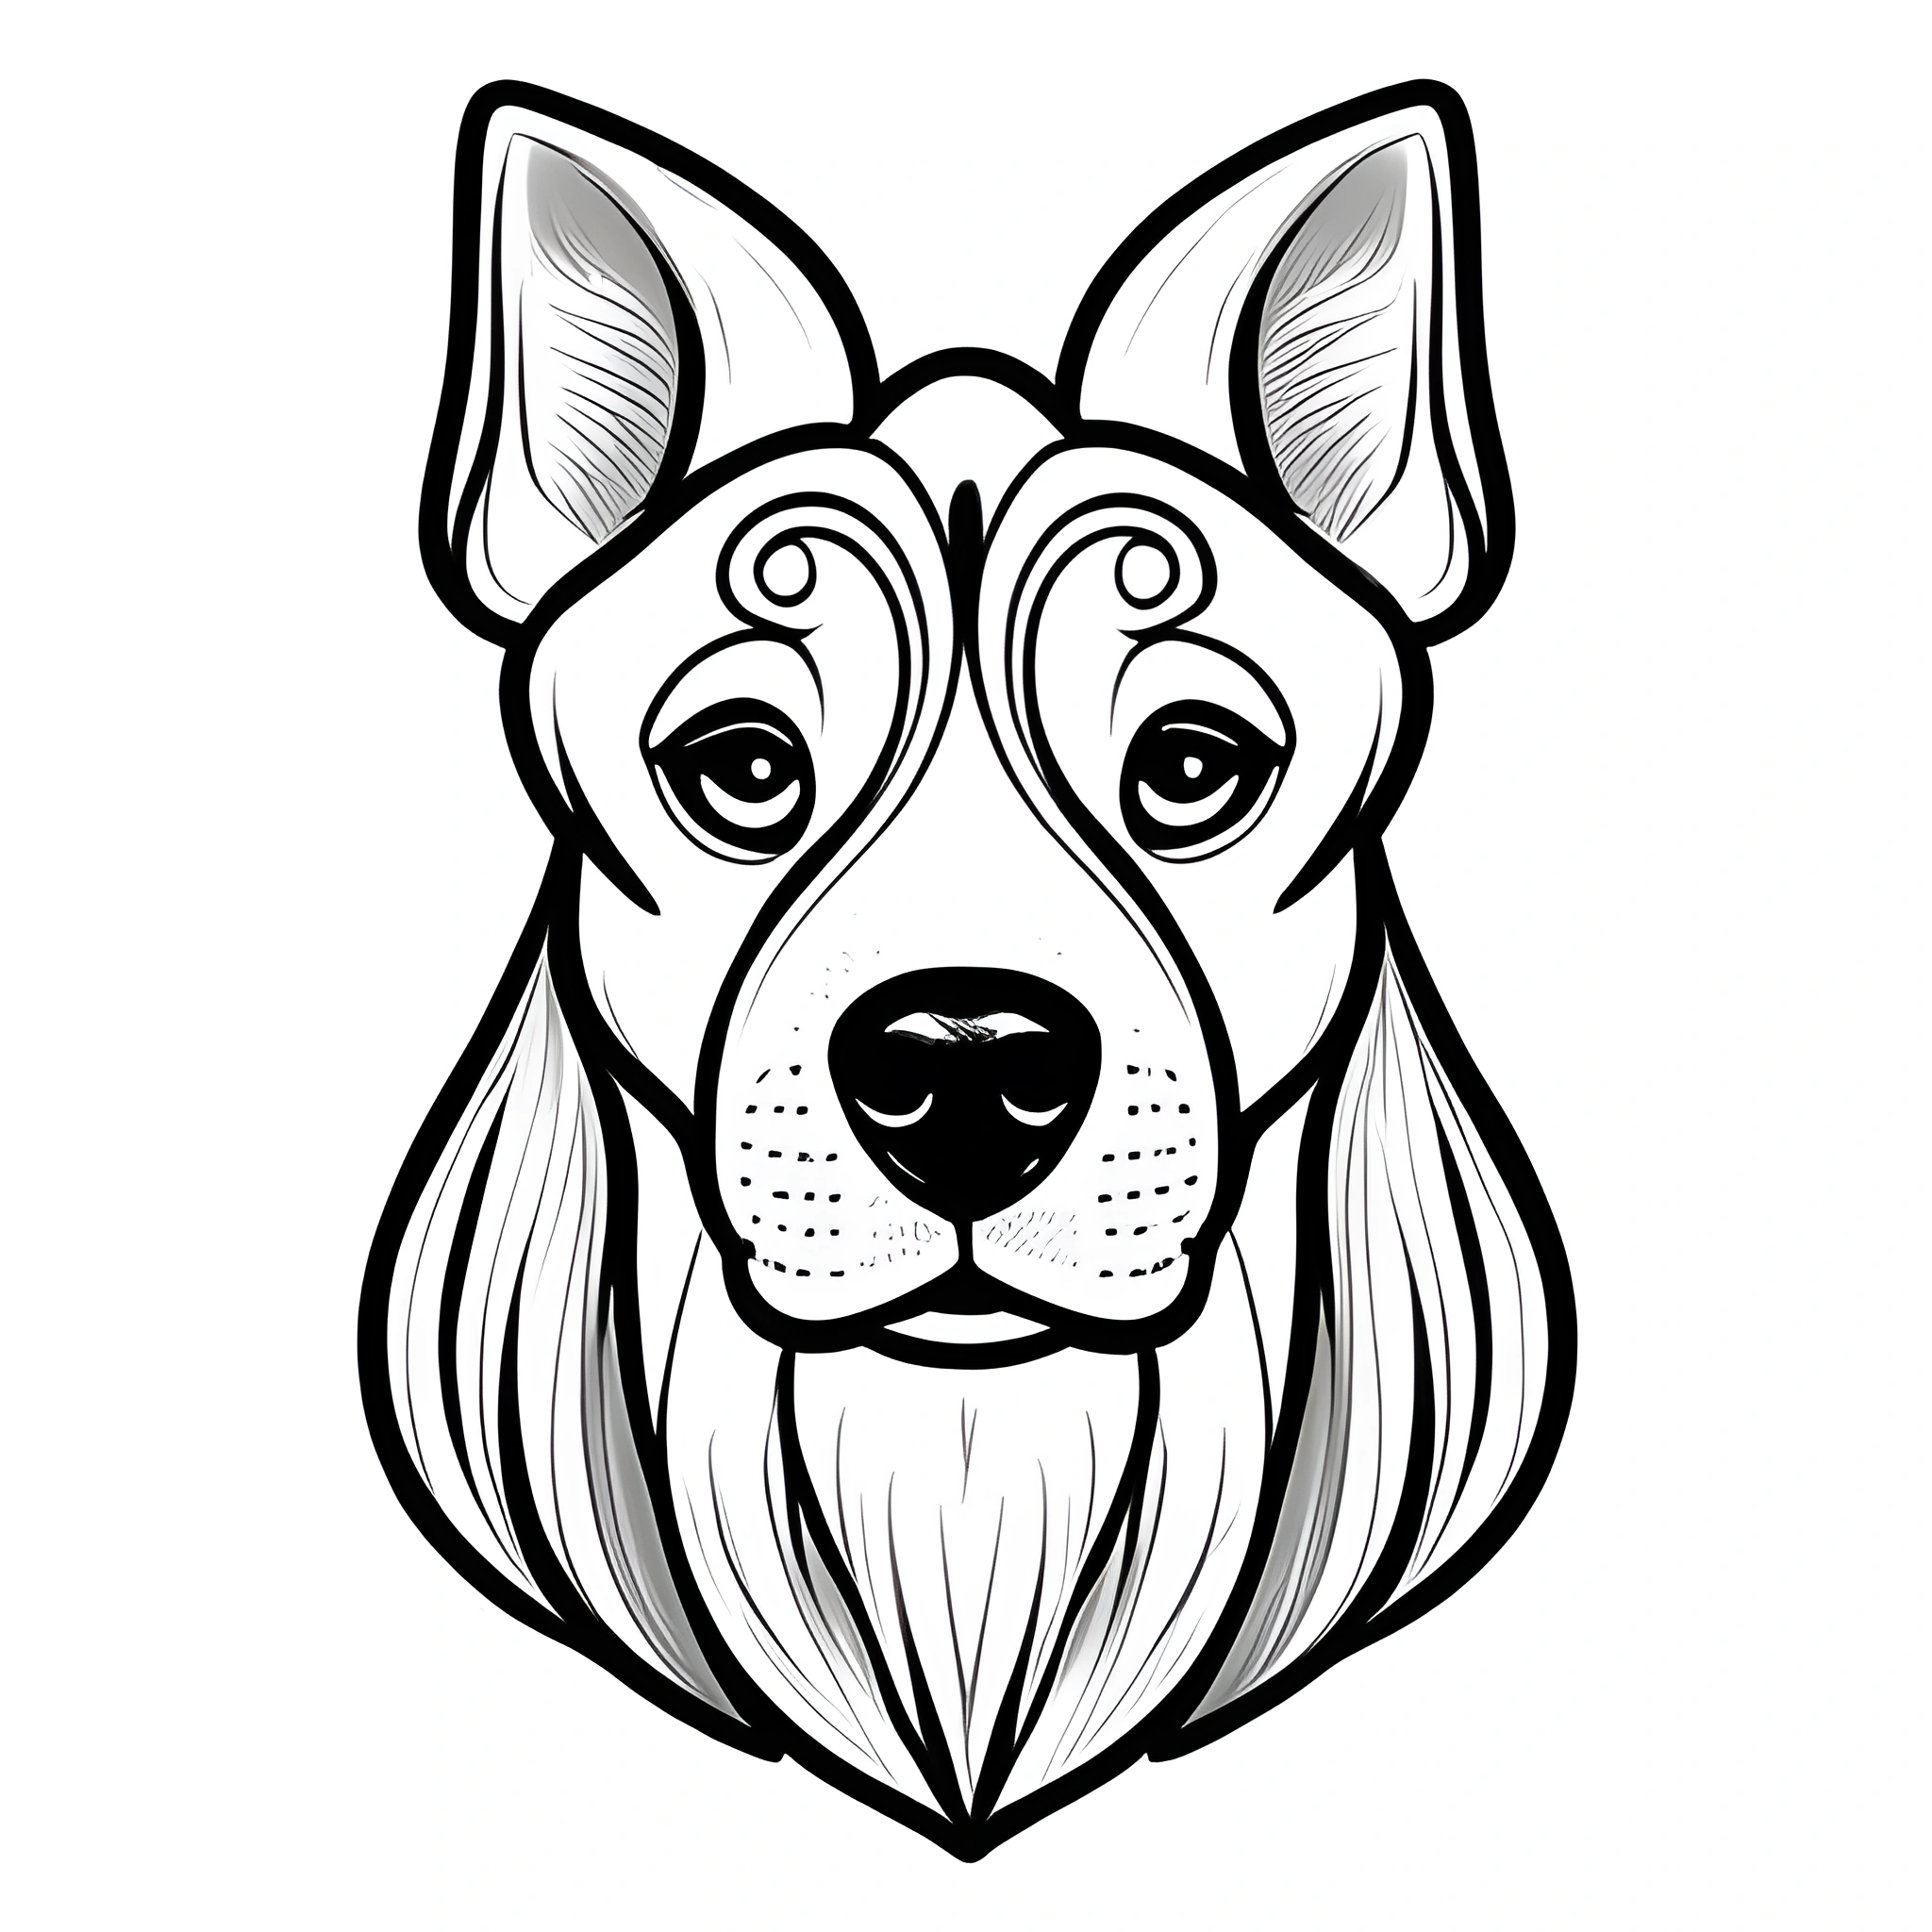 a black and white drawing of a dog with a long hair